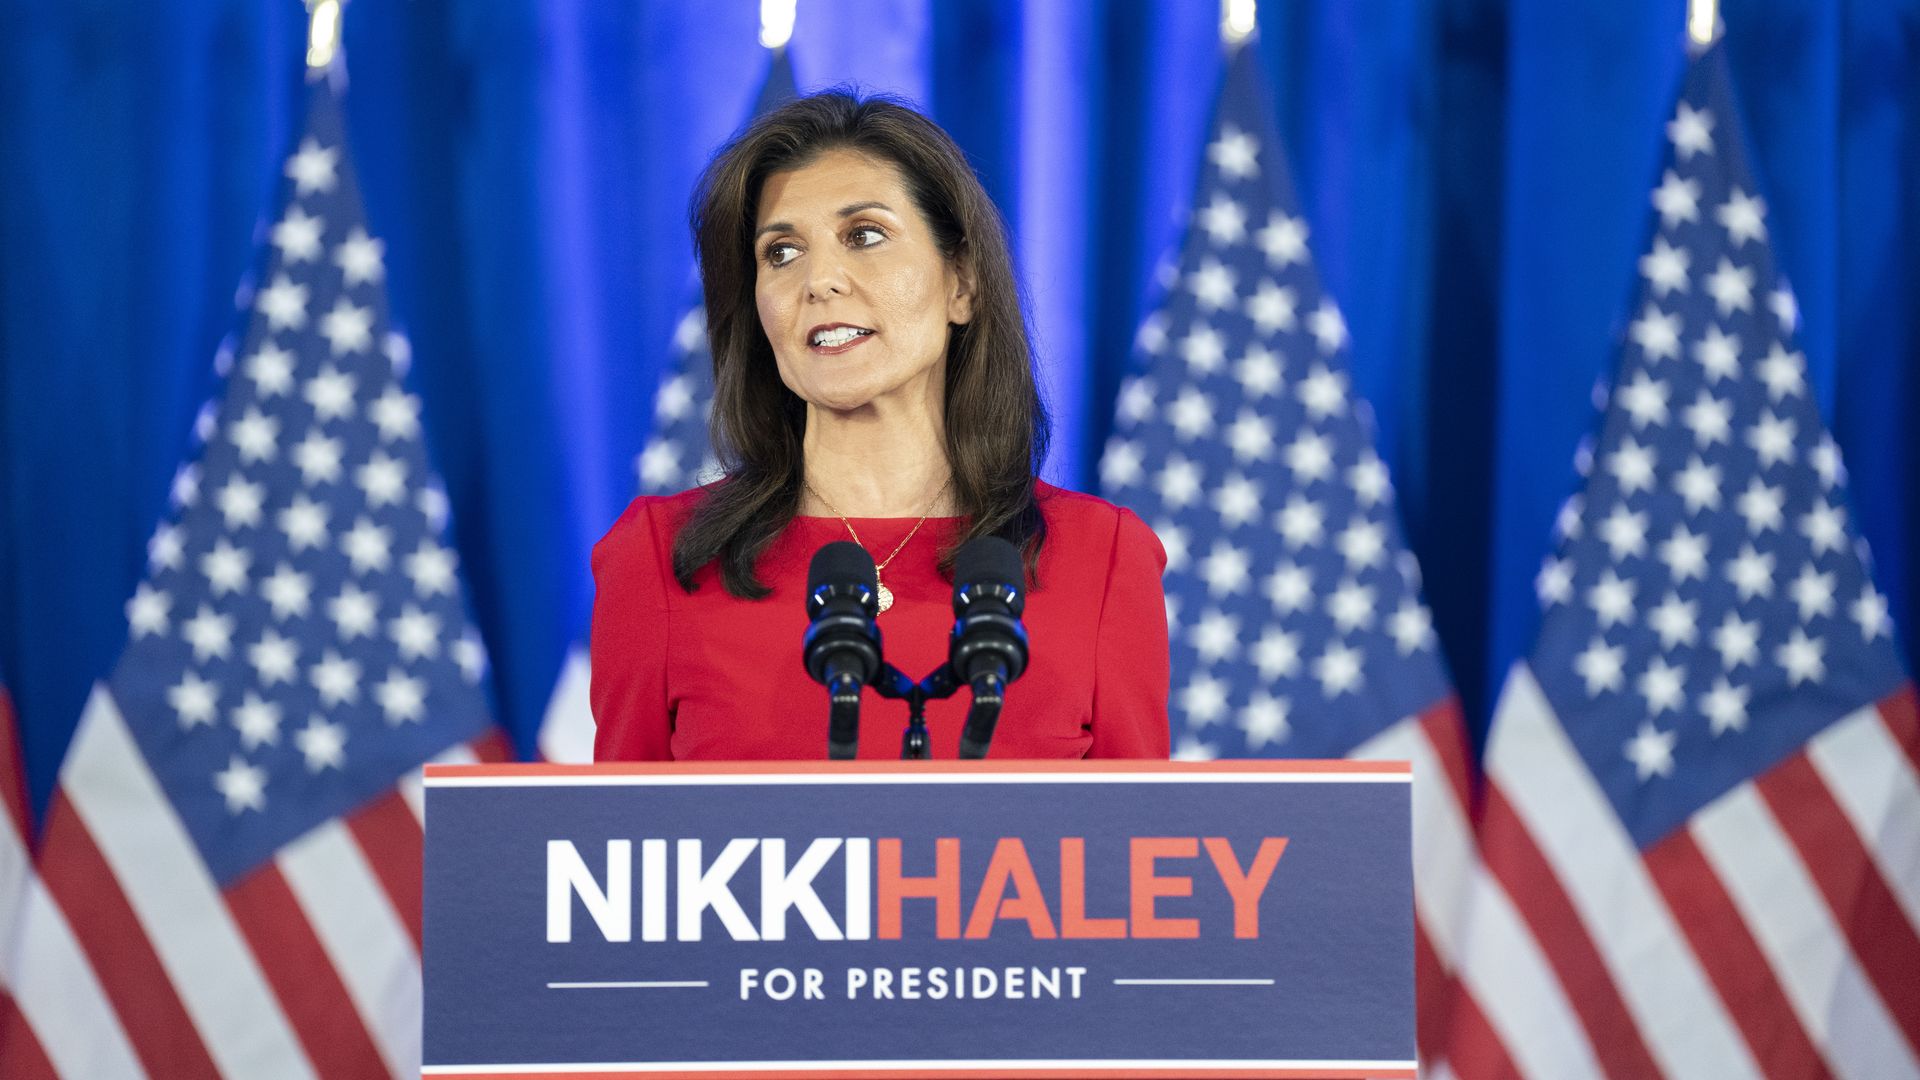 Trump and Biden already fighting over coveted Haley voters